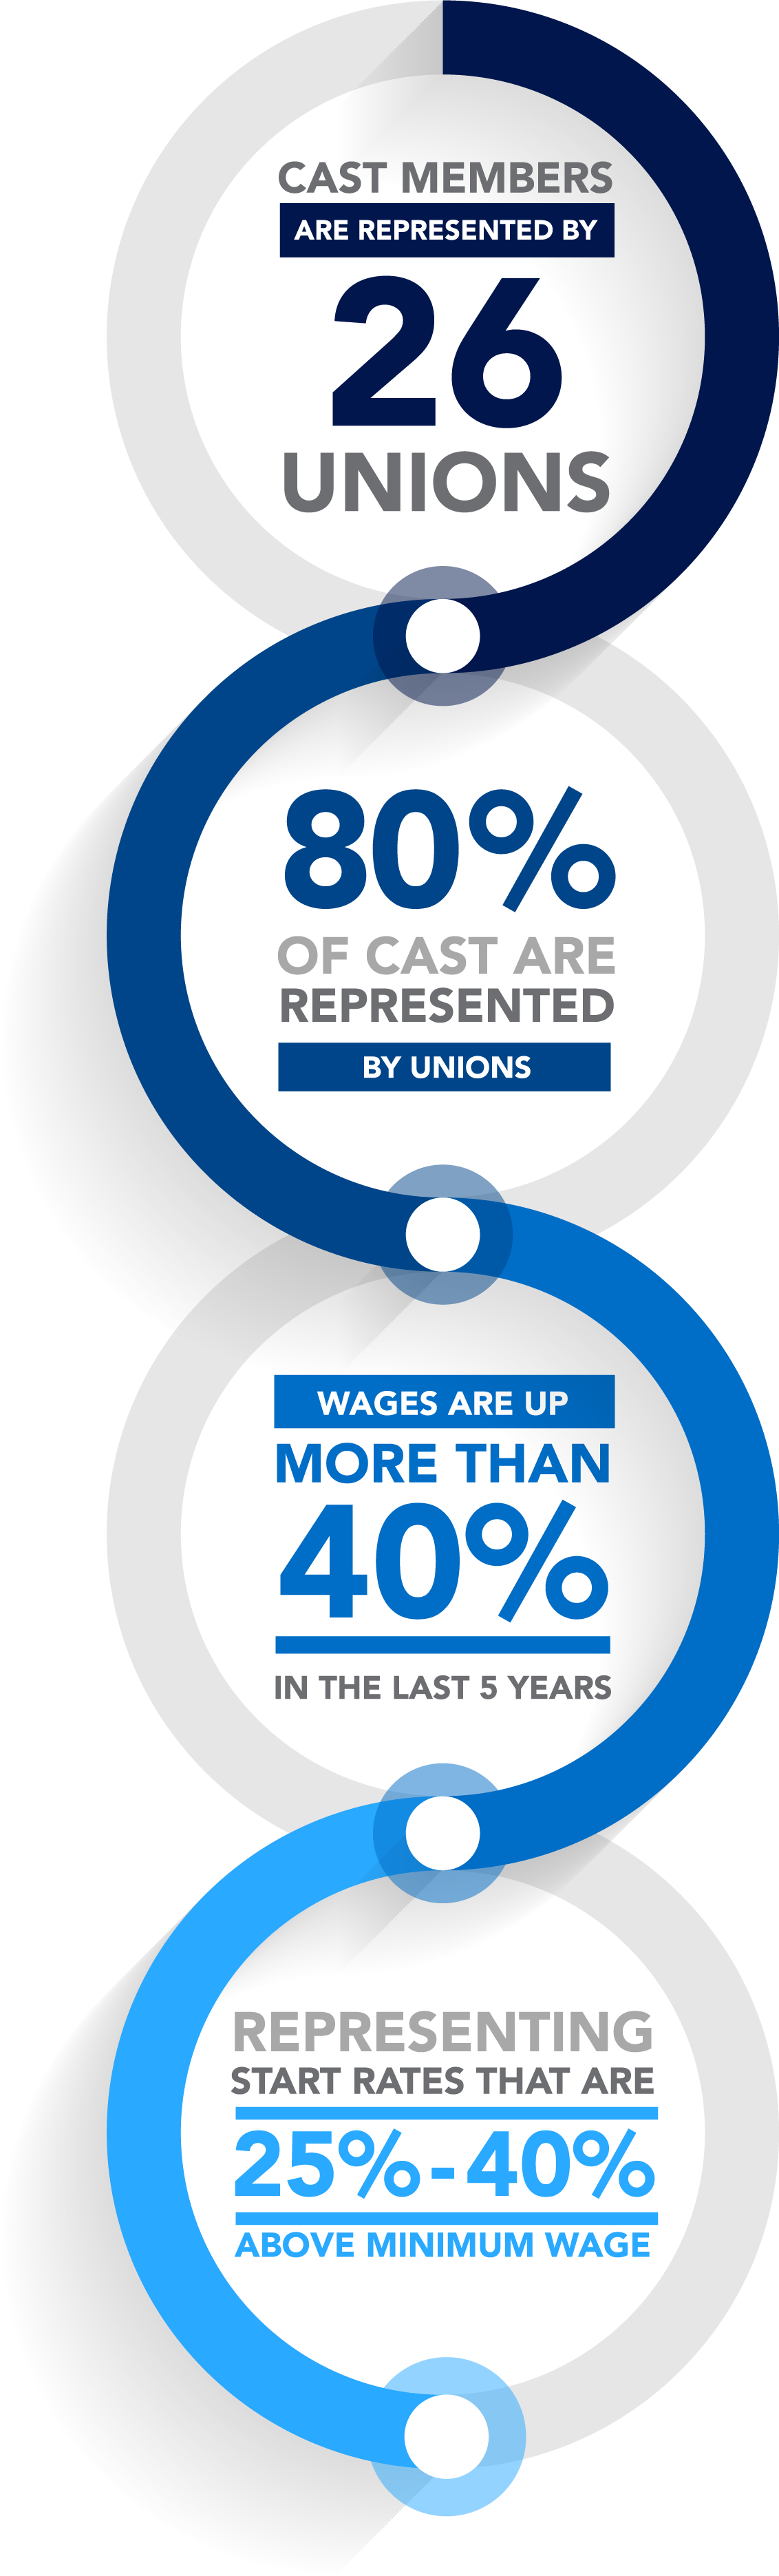 Cast Members are represented by 26 Unions. 80% of Cast are represented by Unions. Wages are up more than 40% in the last 5 years. Representing start rates that are 25%-40% above CM minimum wage.